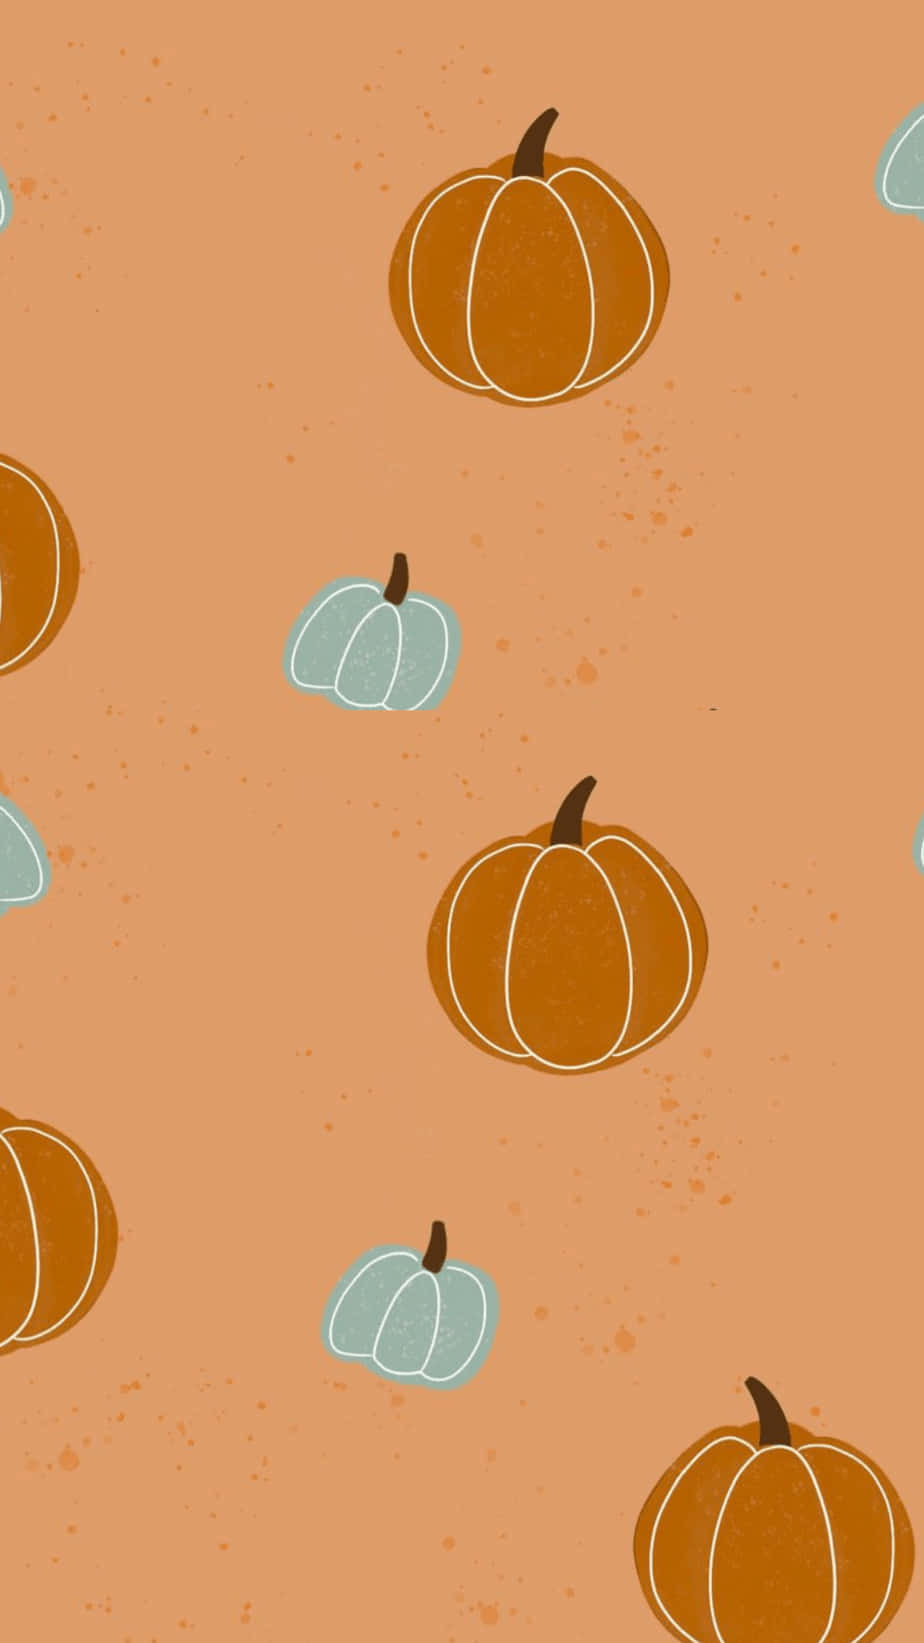 Download Pumpkin wallpapers for mobile phone free Pumpkin HD pictures